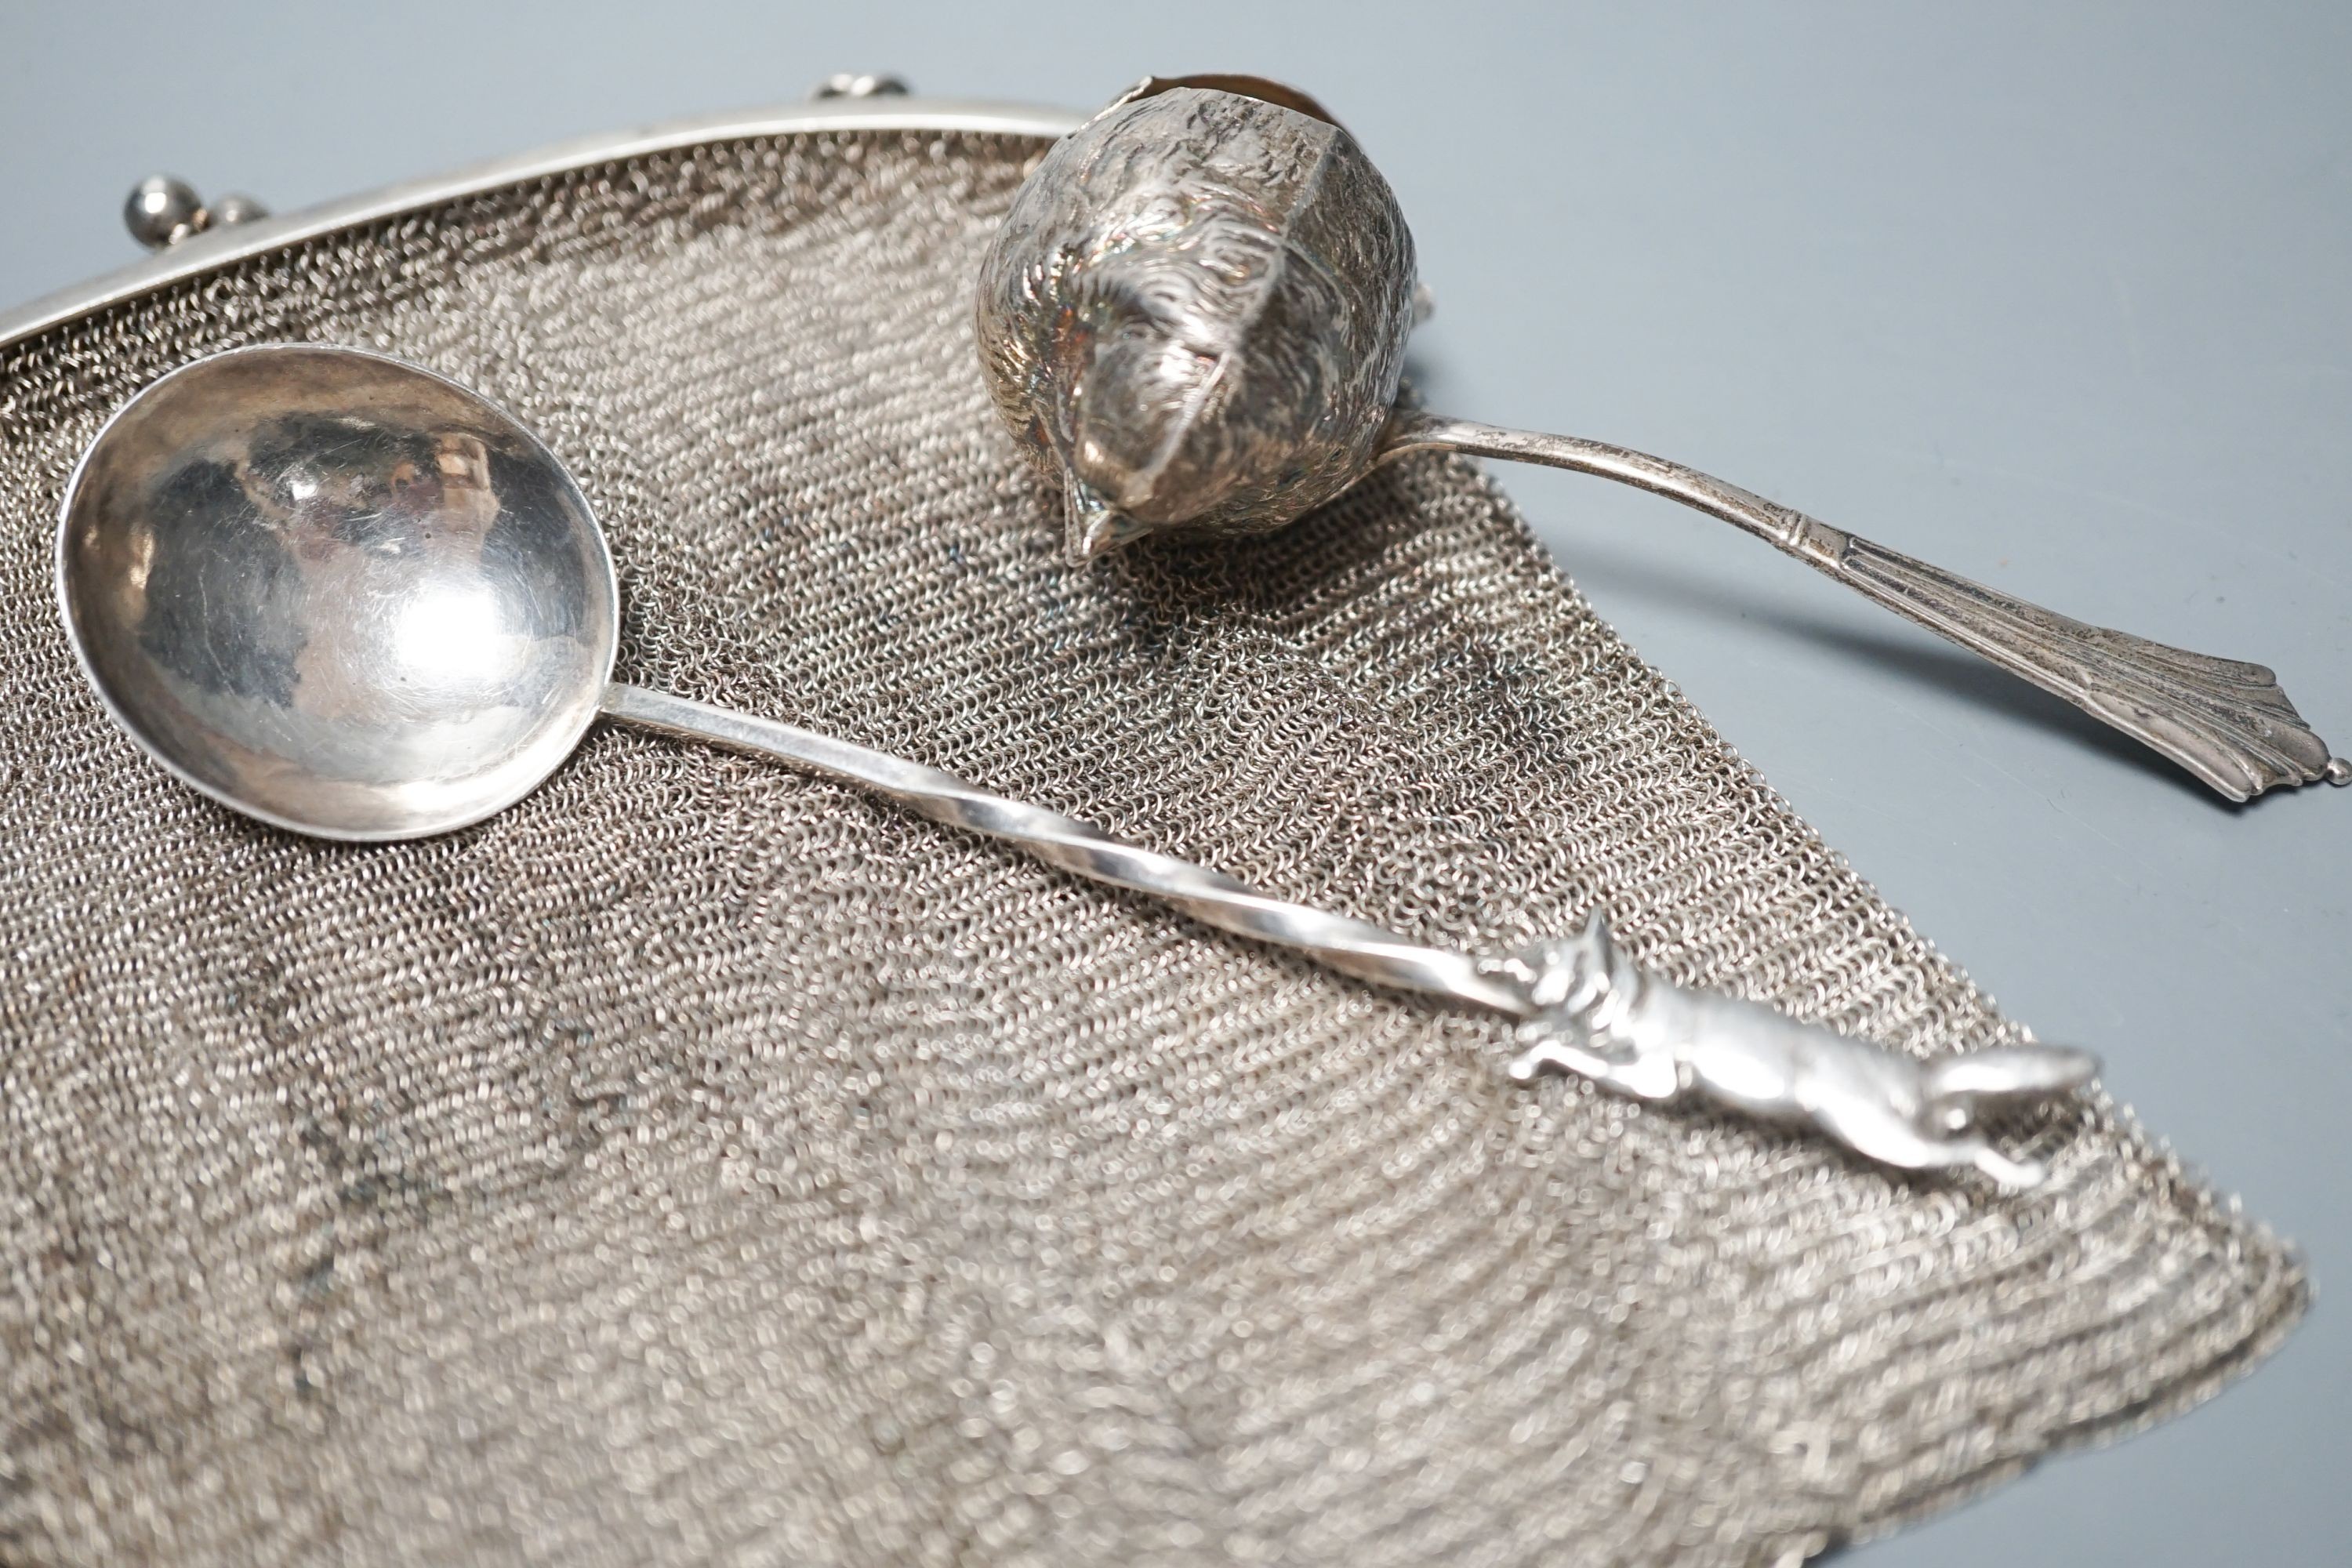 A George silver Arts & Crafts spoon, by Albert Edward Jones, two white metal mesh evening bags and a silver sparrow pourer spoon.